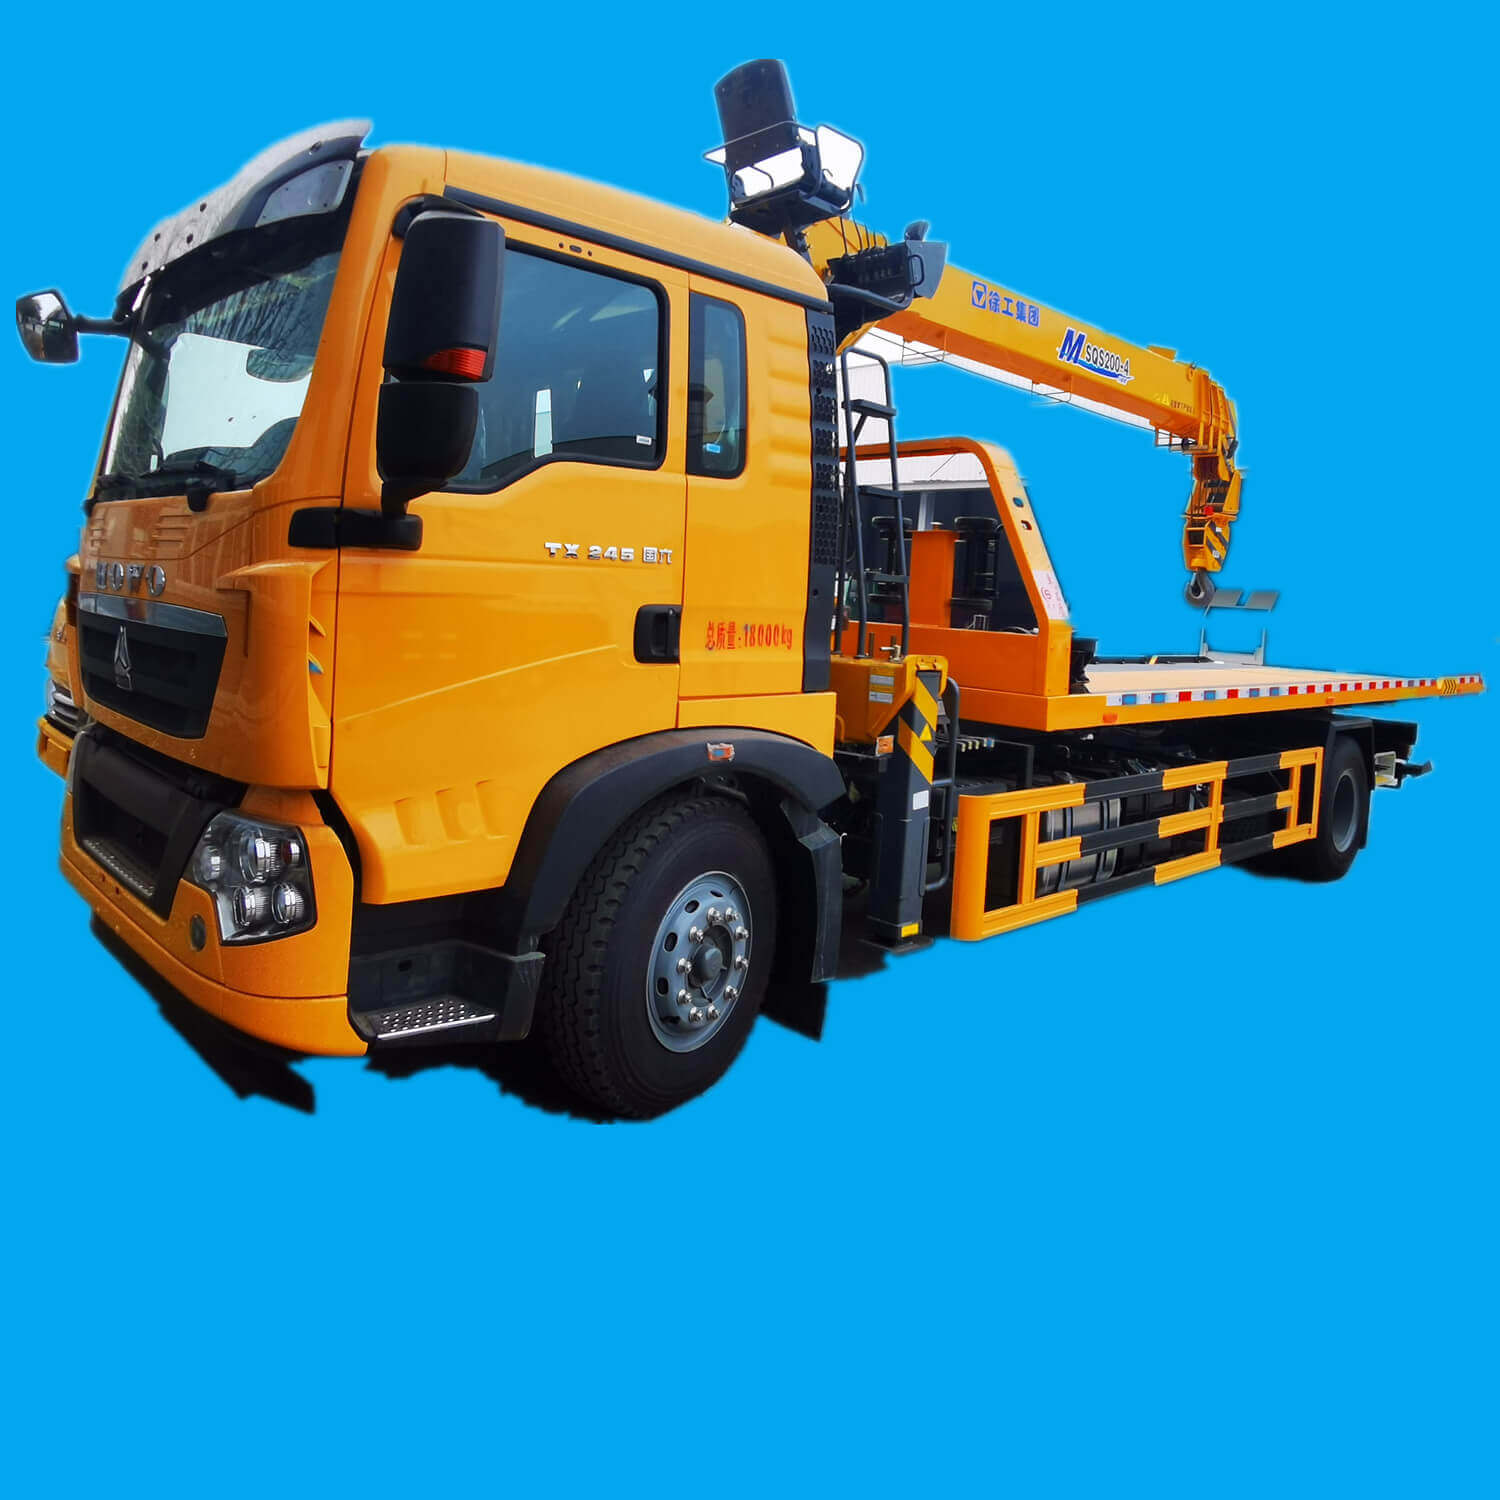  HOWO Slide Tilt Tray Flatbed Recovery Truck Towing Breakdown Truck with 8ton Hydraulic Winch 8ton Boom Hydraulic Crane Sqs200-4 Towing 18ton